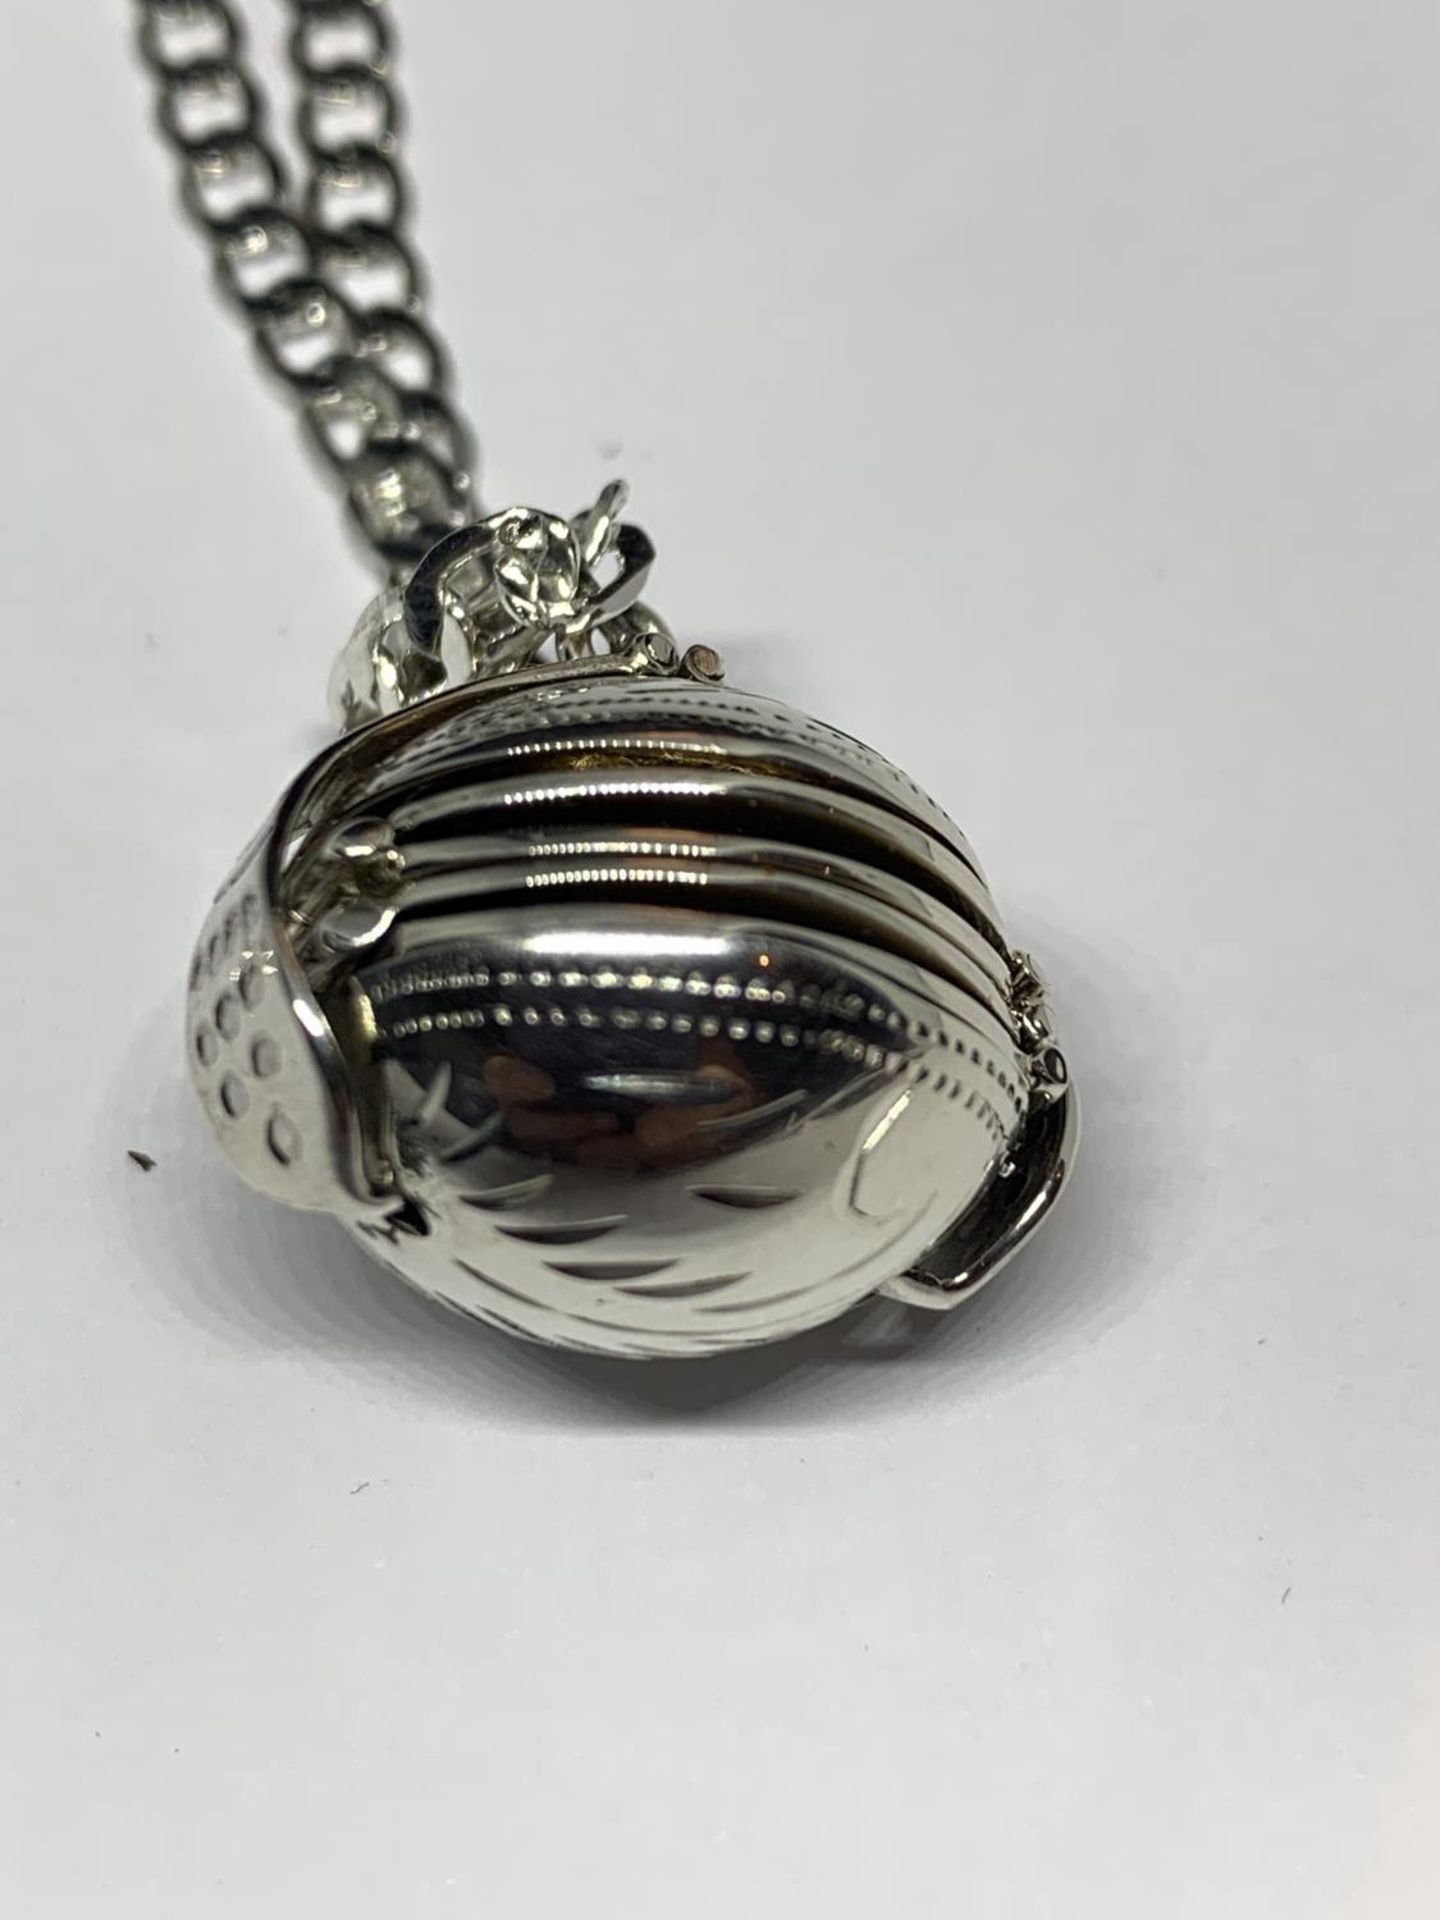 A MARKD SILVER NECKLACE WITH AN ORNATE BALL LOCKET PENDANT - Image 4 of 8